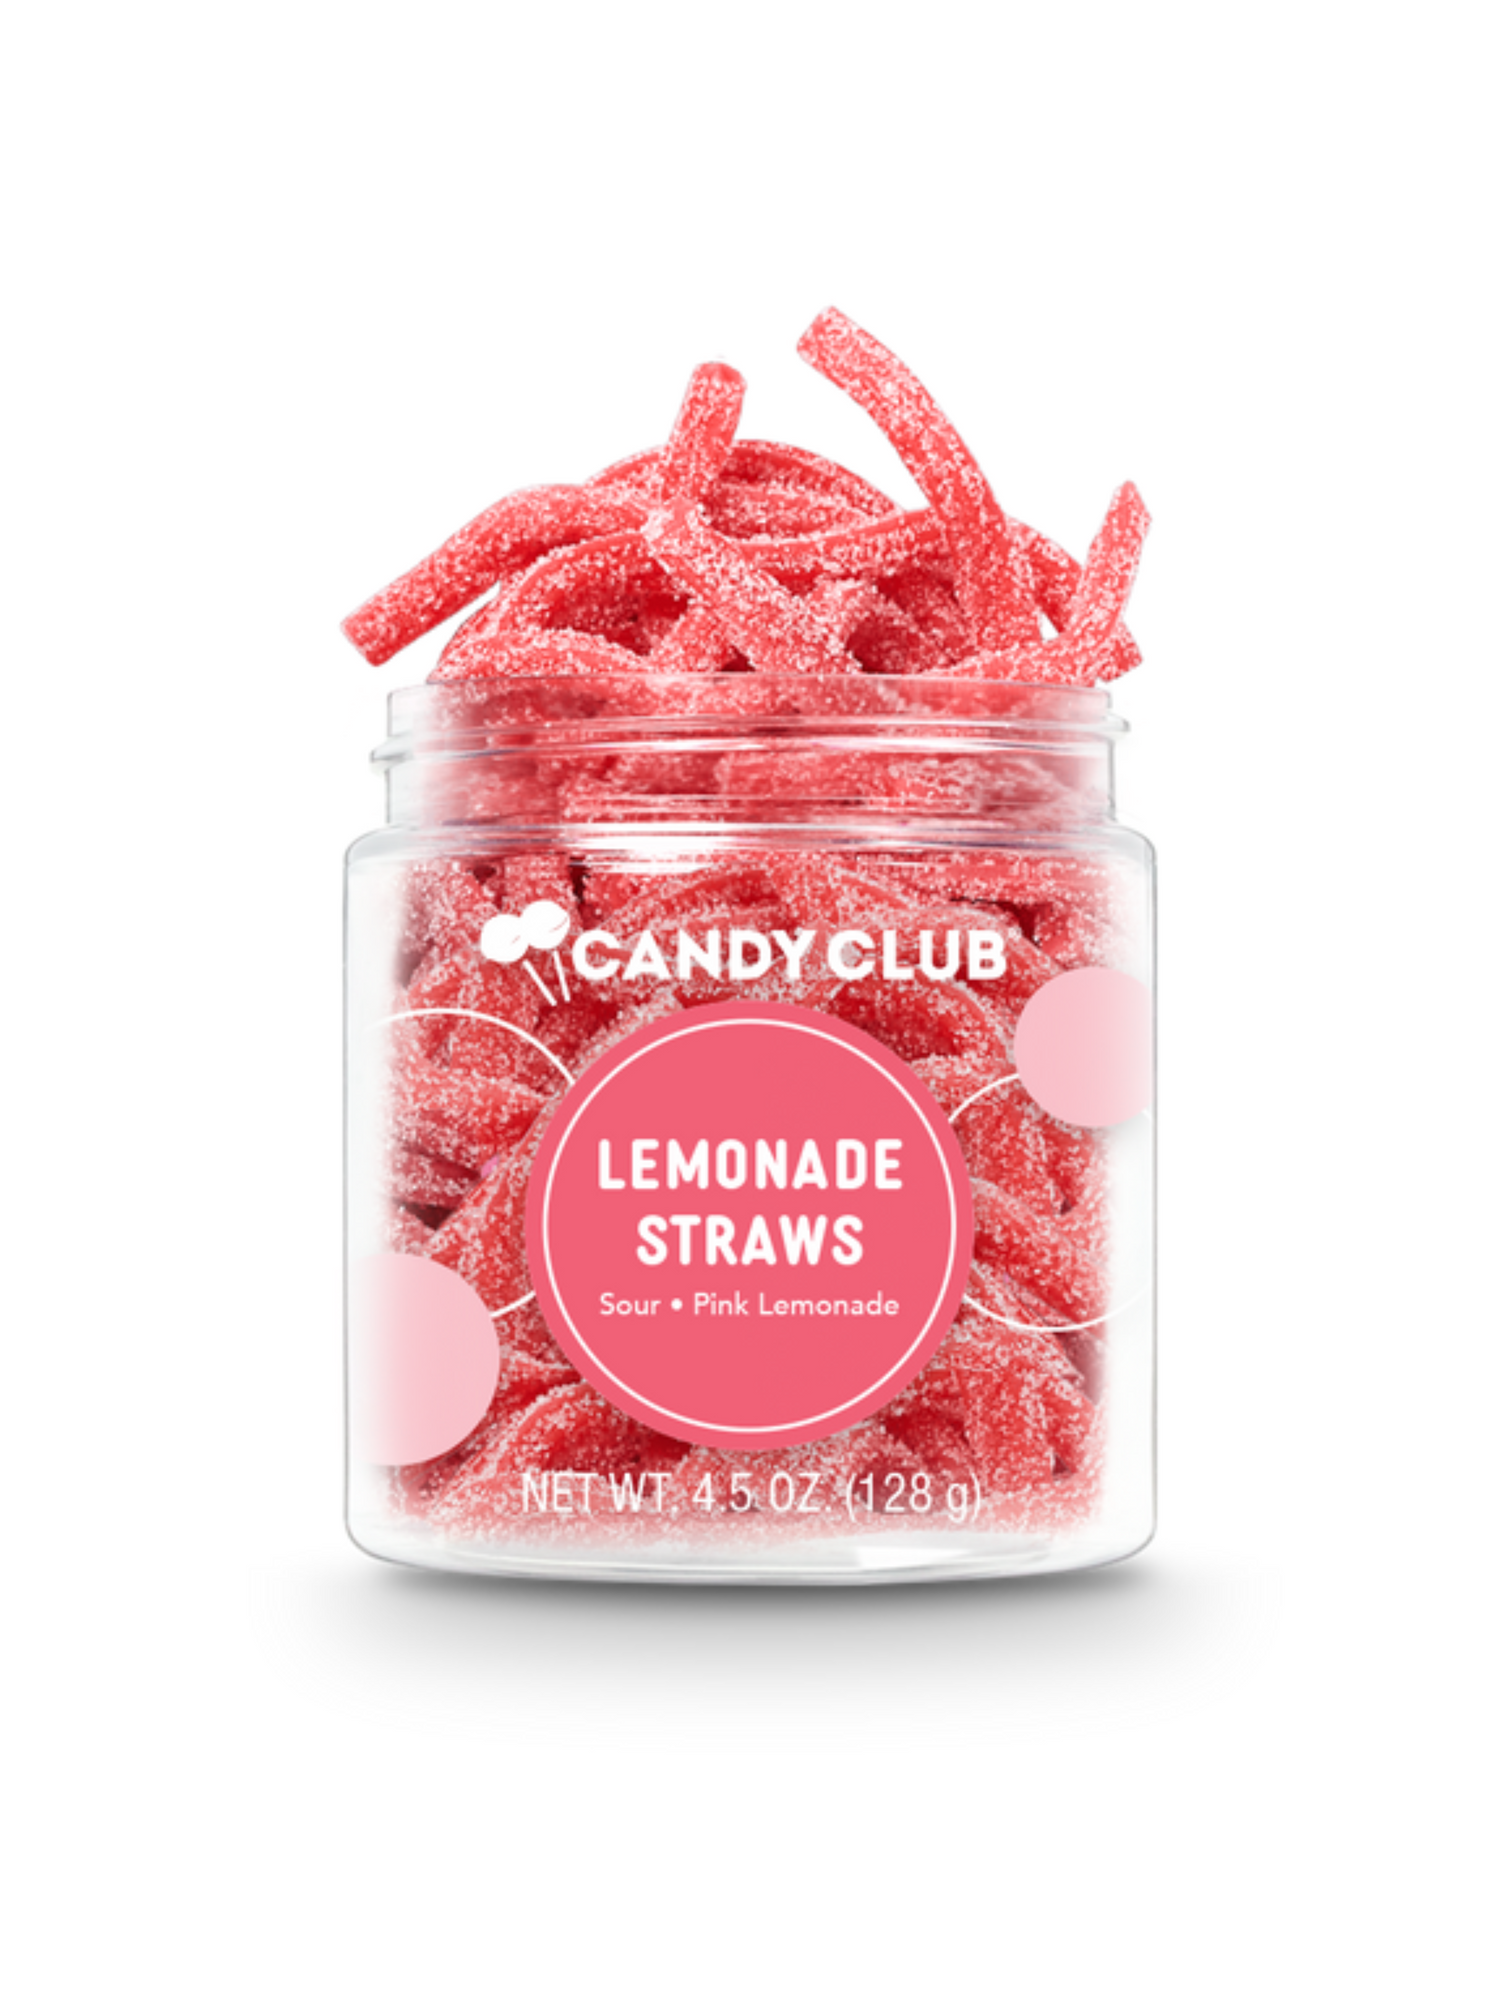 sour pink lemonade straw candy